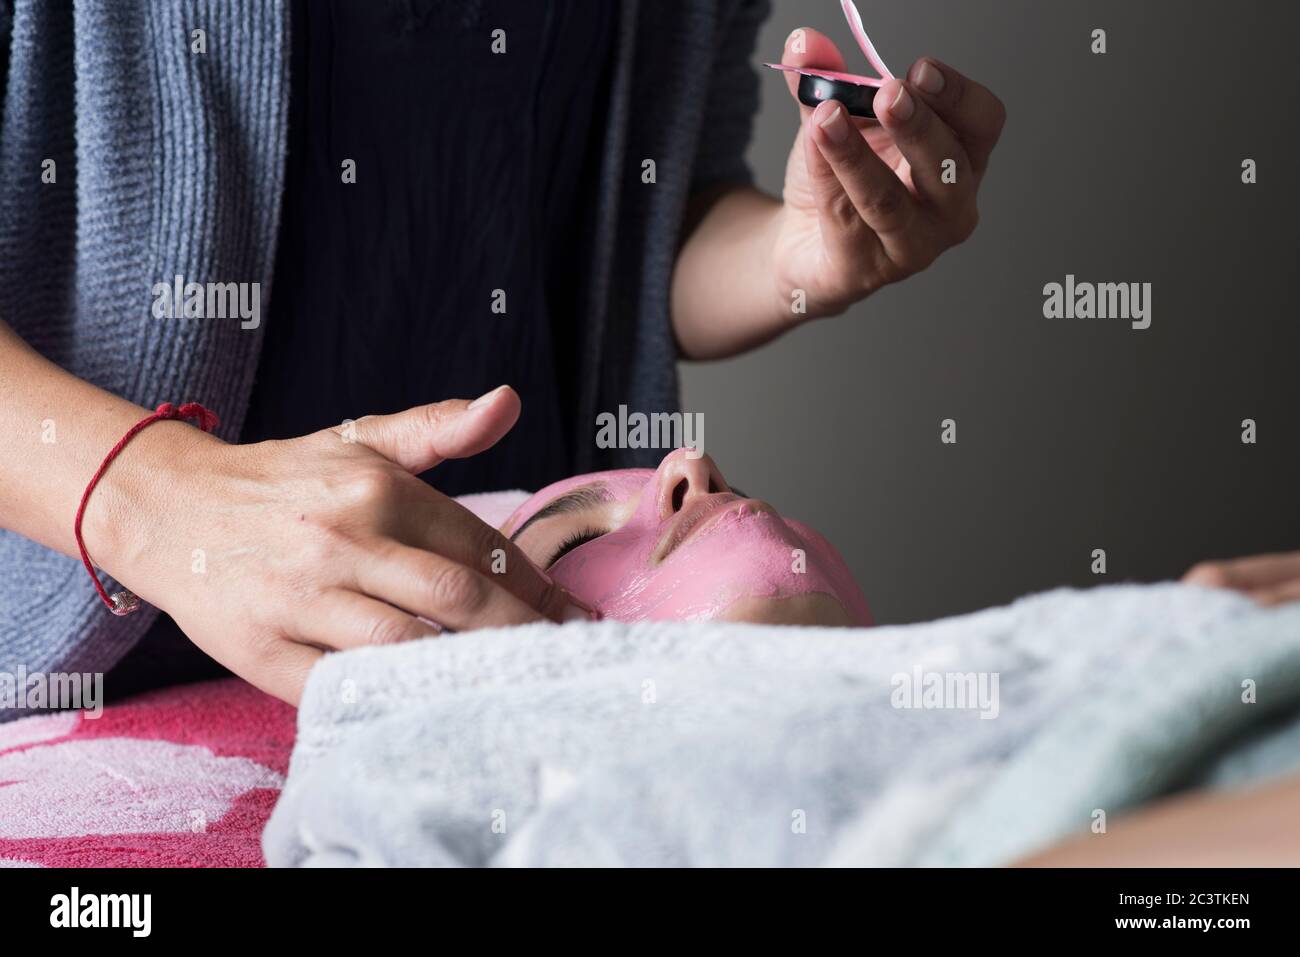 Lockdown beauty treatment, therapist applying  a face mask at home during Covid 19 lockdown Stock Photo